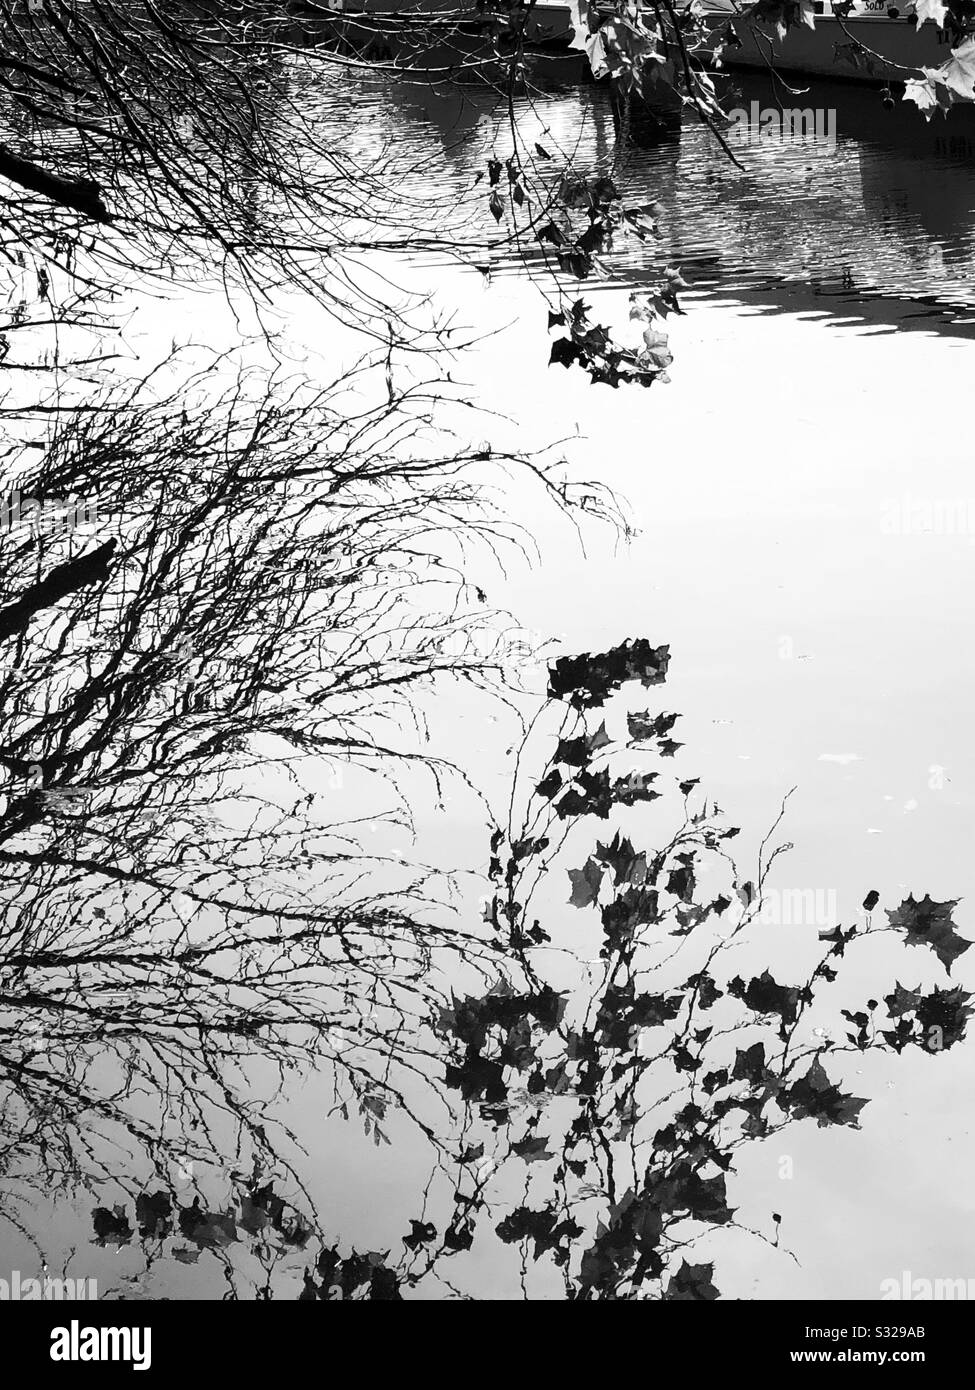 Tree and leaves reflected in calm water Stock Photo